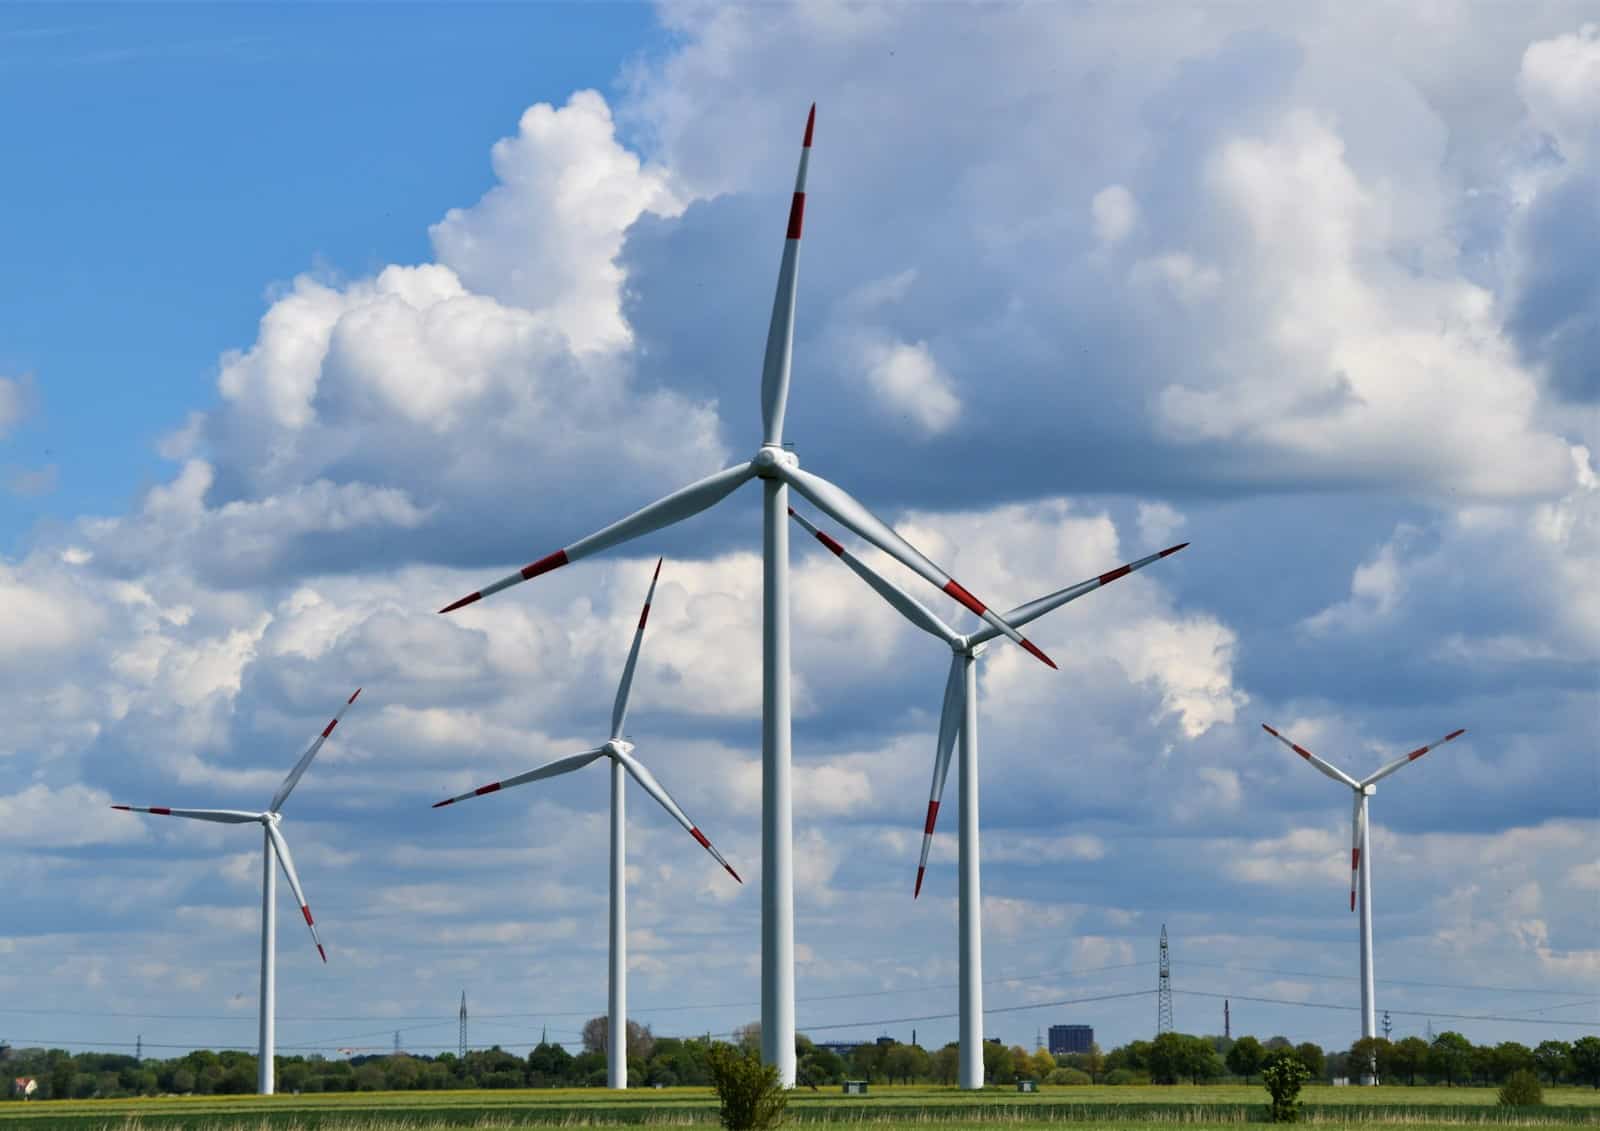 white wind turbines on green grass field under blue and white cloudy sky during daytime